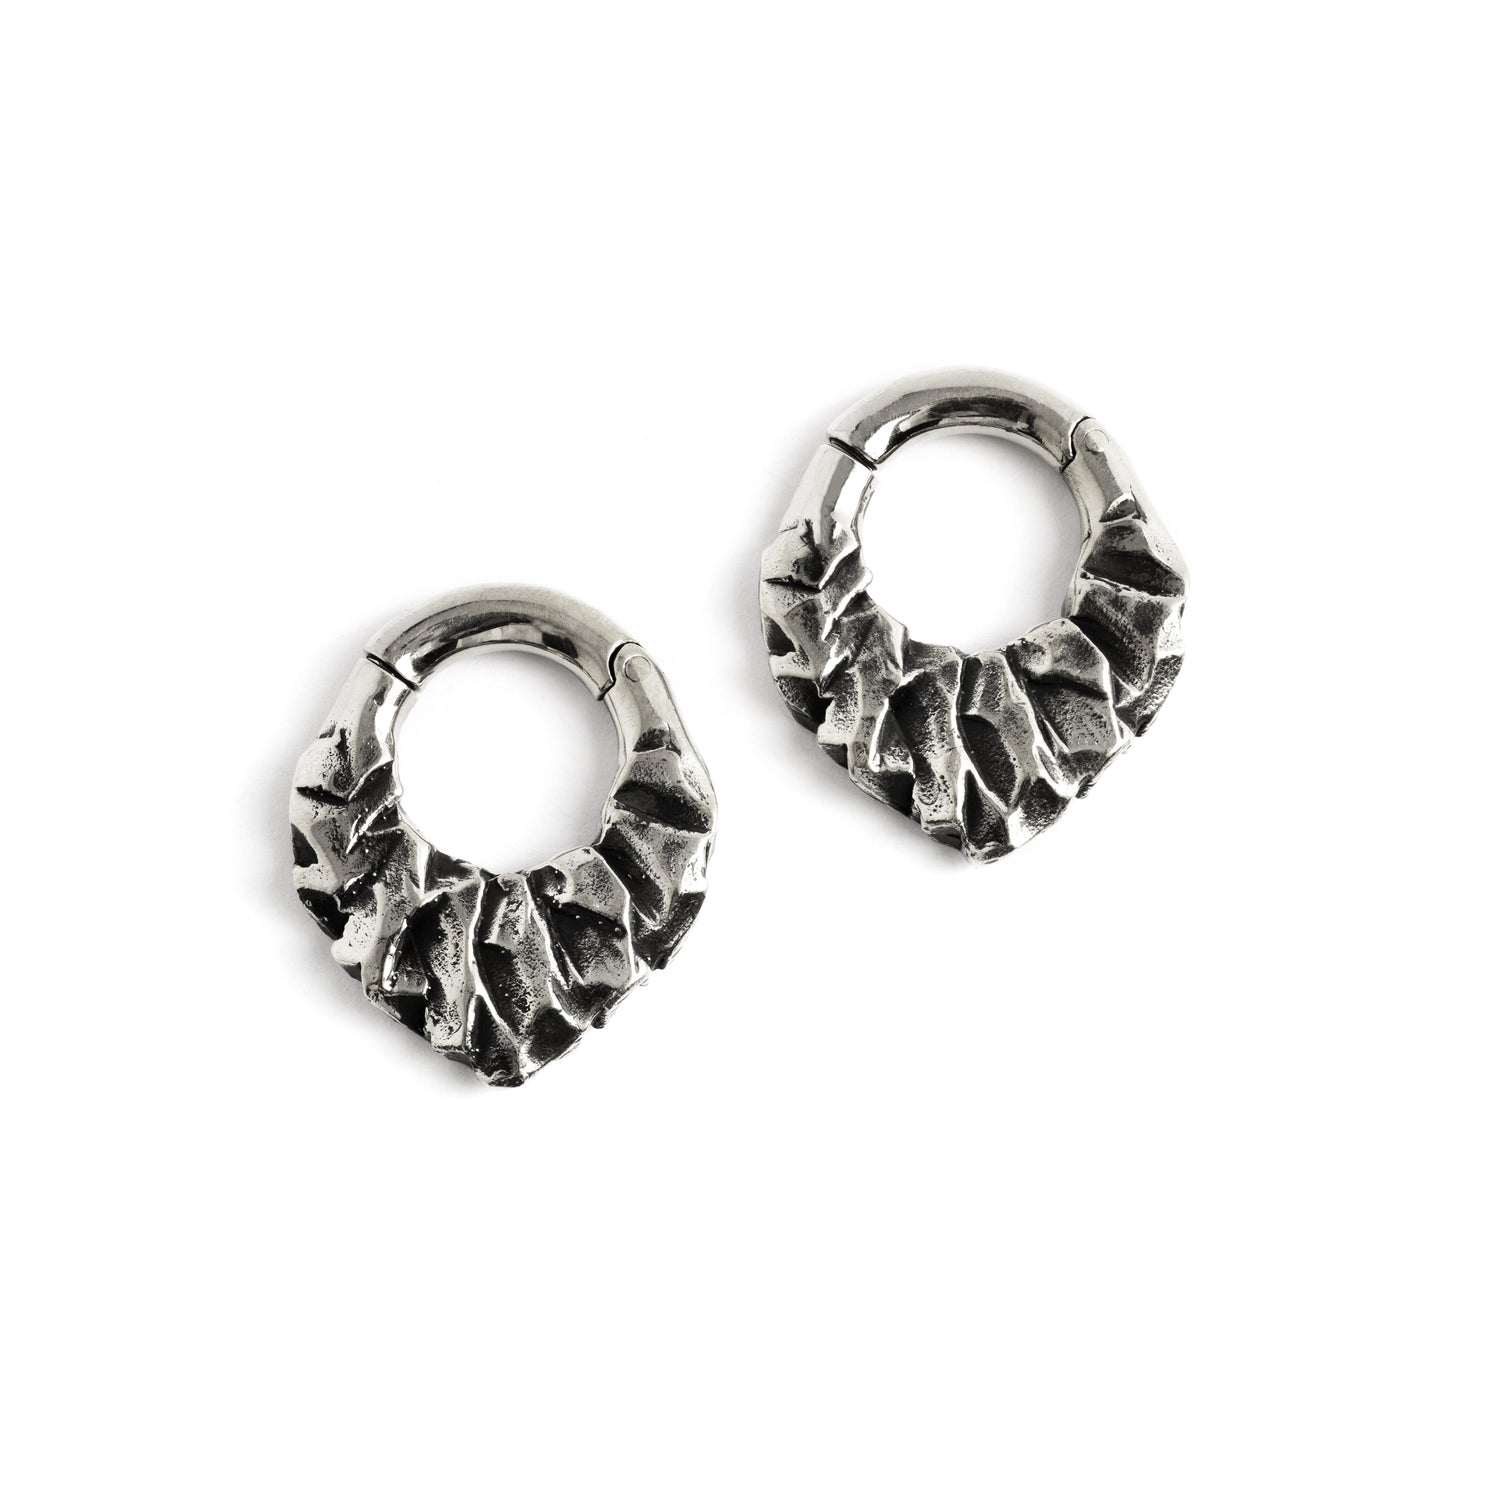 pair of silver brass teardrop shaped ear hoops hangers with rocky texture frontal view